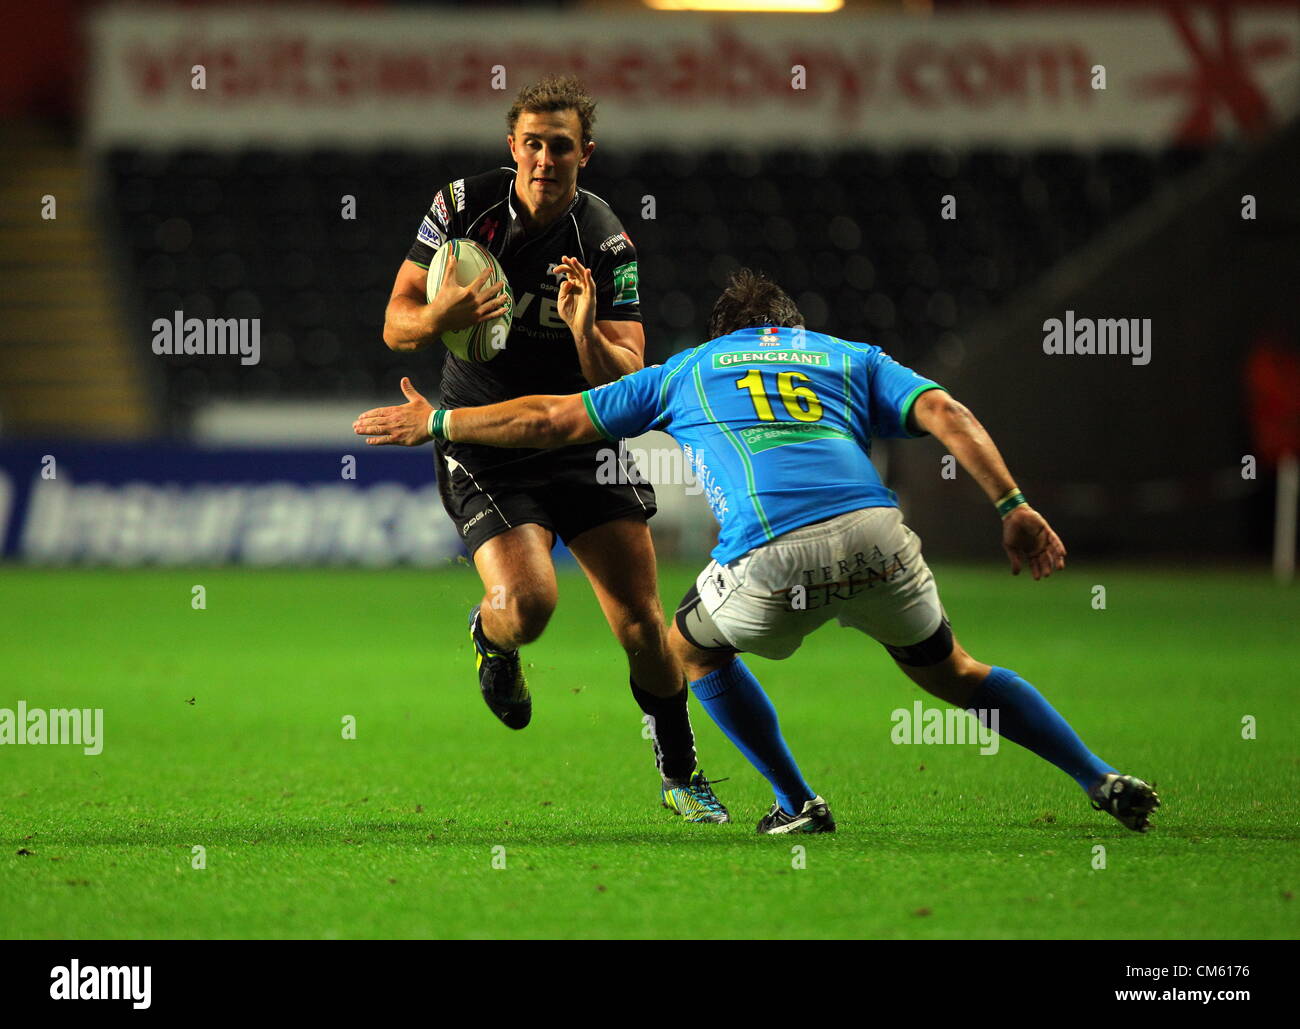 Friday 12 October 2012  Pictured L-R: Ashley Beck of the Ospreys against Enrico Ceccato of Benetton Treviso.   Re: Heineken Cup, Ospreys v Benetton Treviso at the Liberty Stadium, SWansea, south Wales. Stock Photo